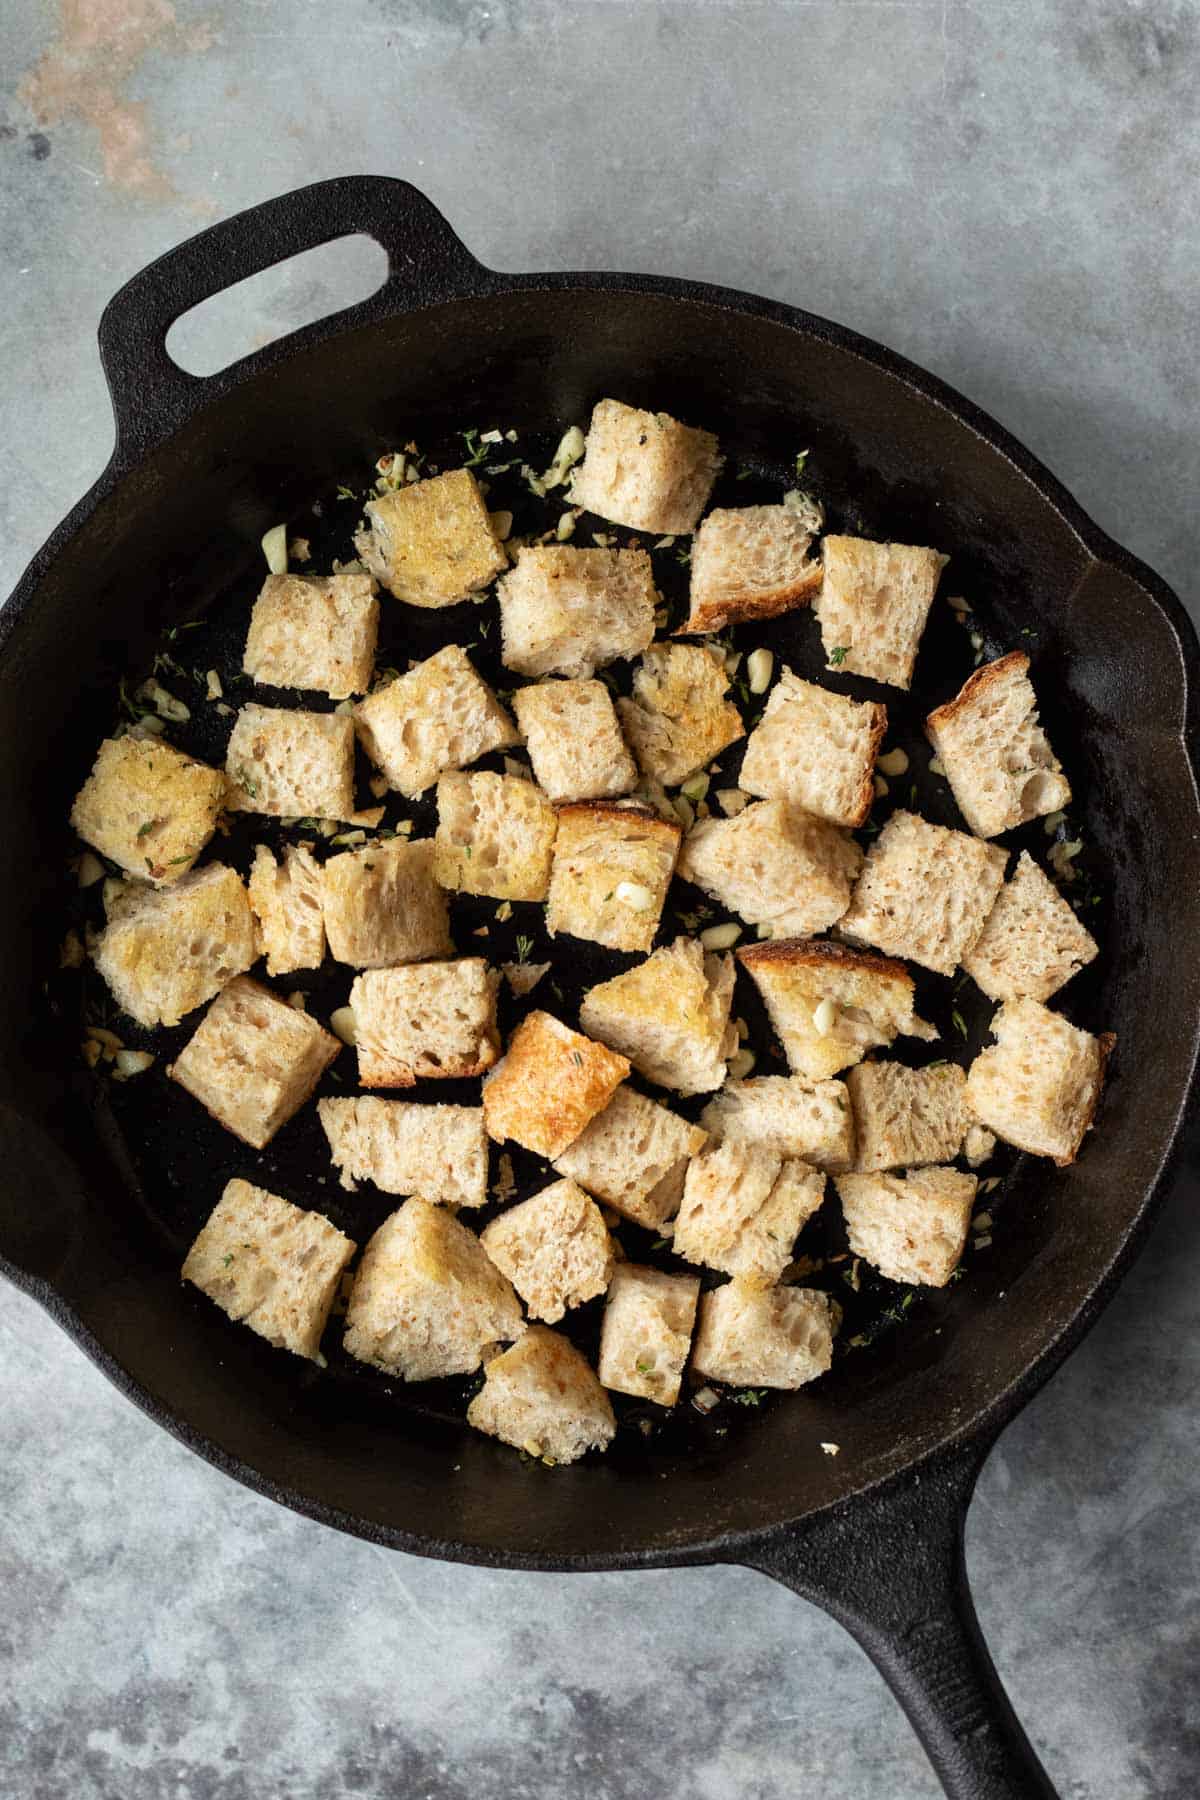 Sourdough bread cubes toasting in a skillet.